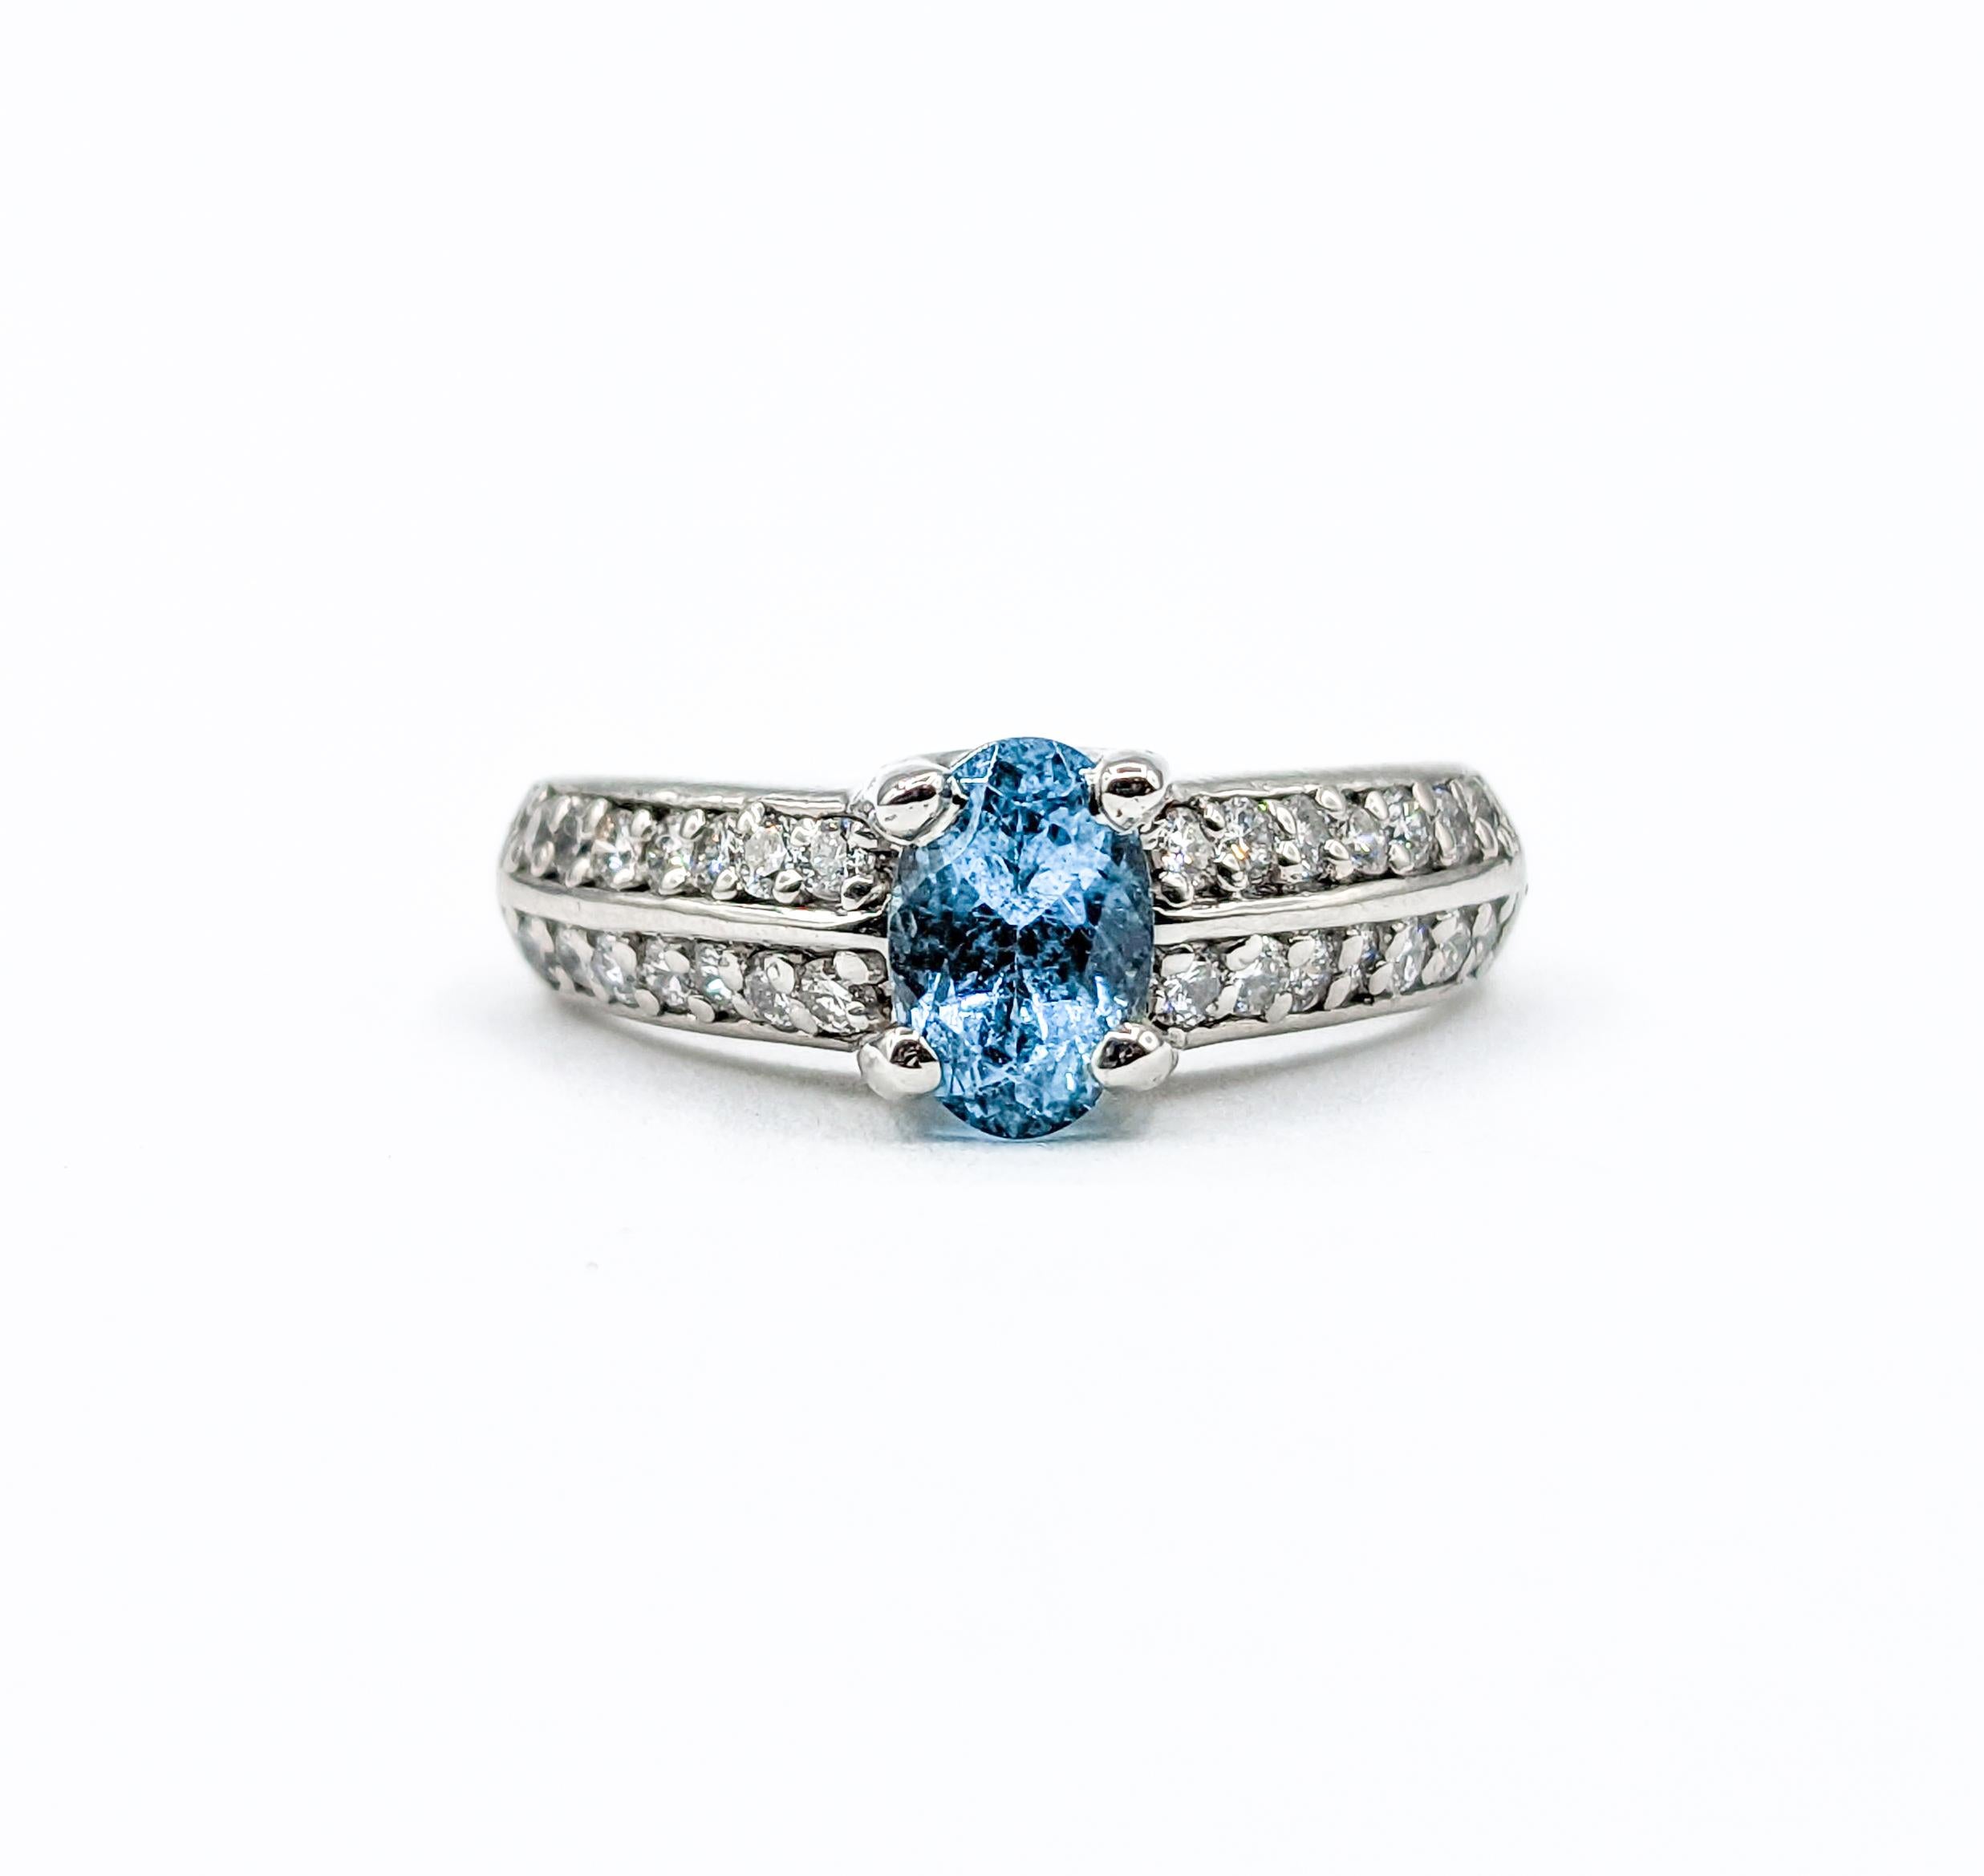 Classy Aquamarine & Diamond Ring in Platinum

Discover a stunning ring crafted from premium 950 platinum and adorned with a breathtaking .37ctw round diamonds. The sparkling diamonds boast impressive SI1 clarity and H color, adding a touch of